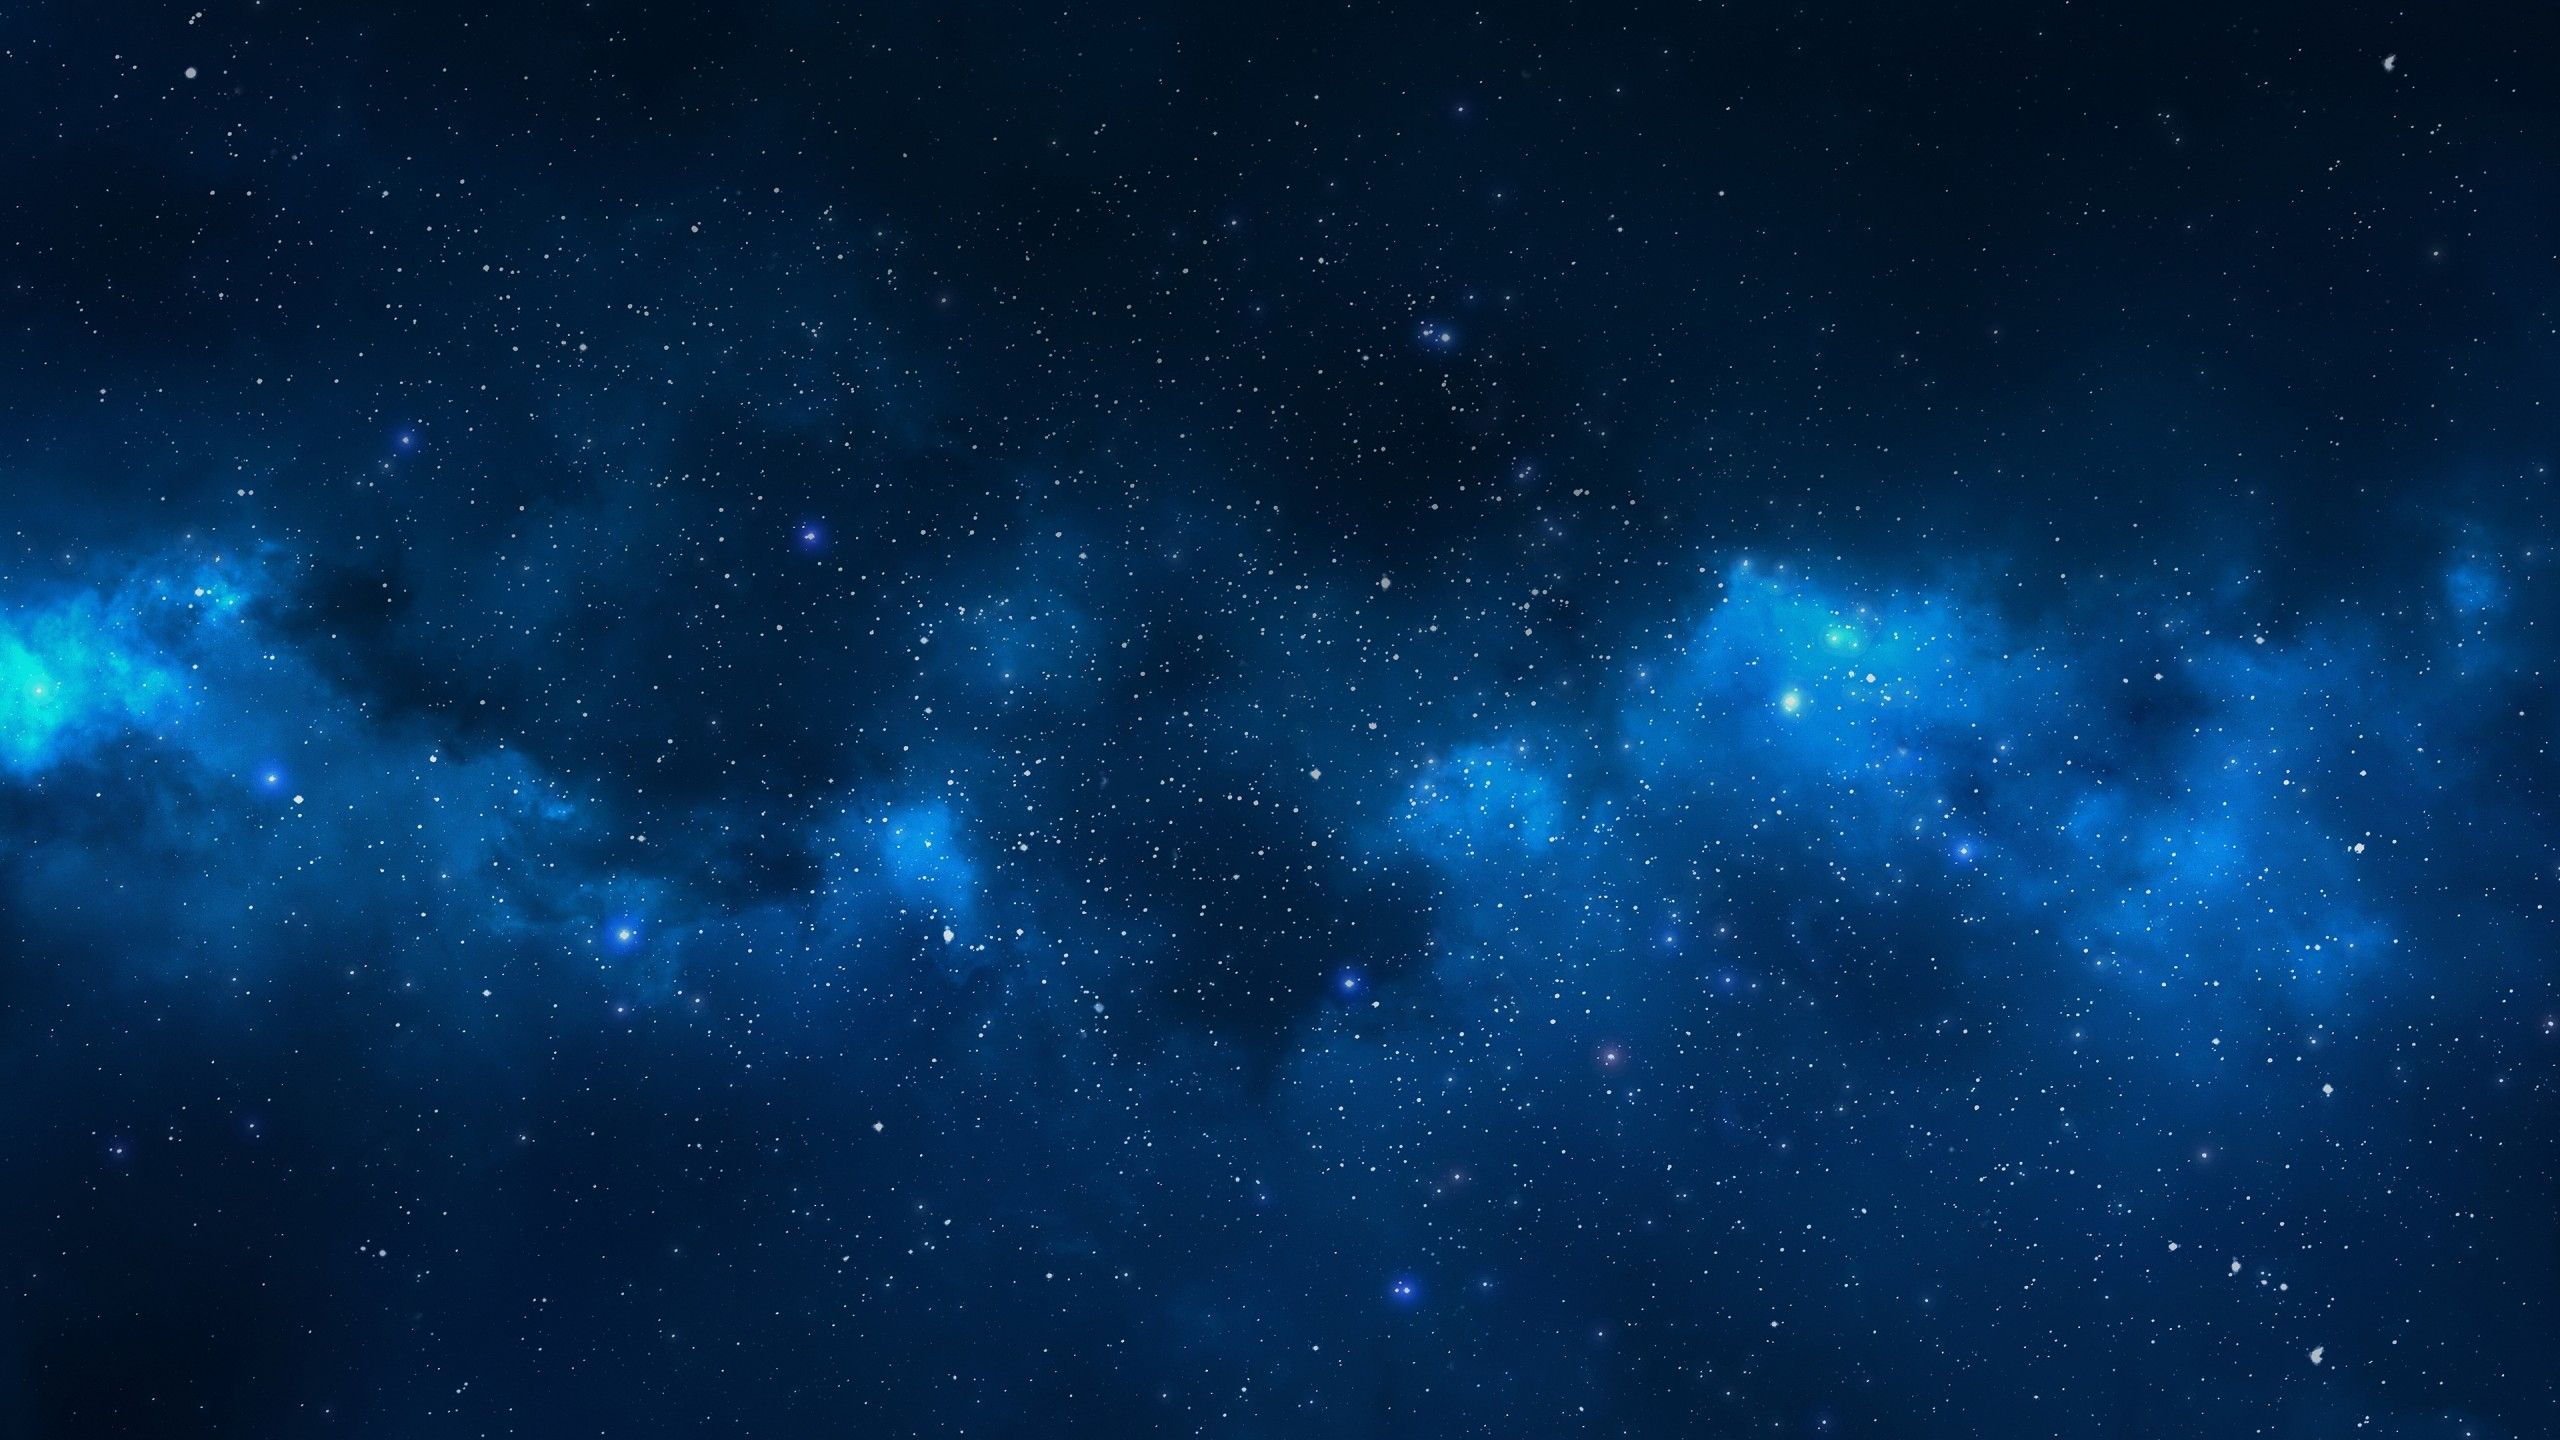 Latest 4K Wallpaper Galaxy FULL HD 1920×1080 For PC Background. Galaxy wallpaper, Blue galaxy wallpaper, Wallpaper space